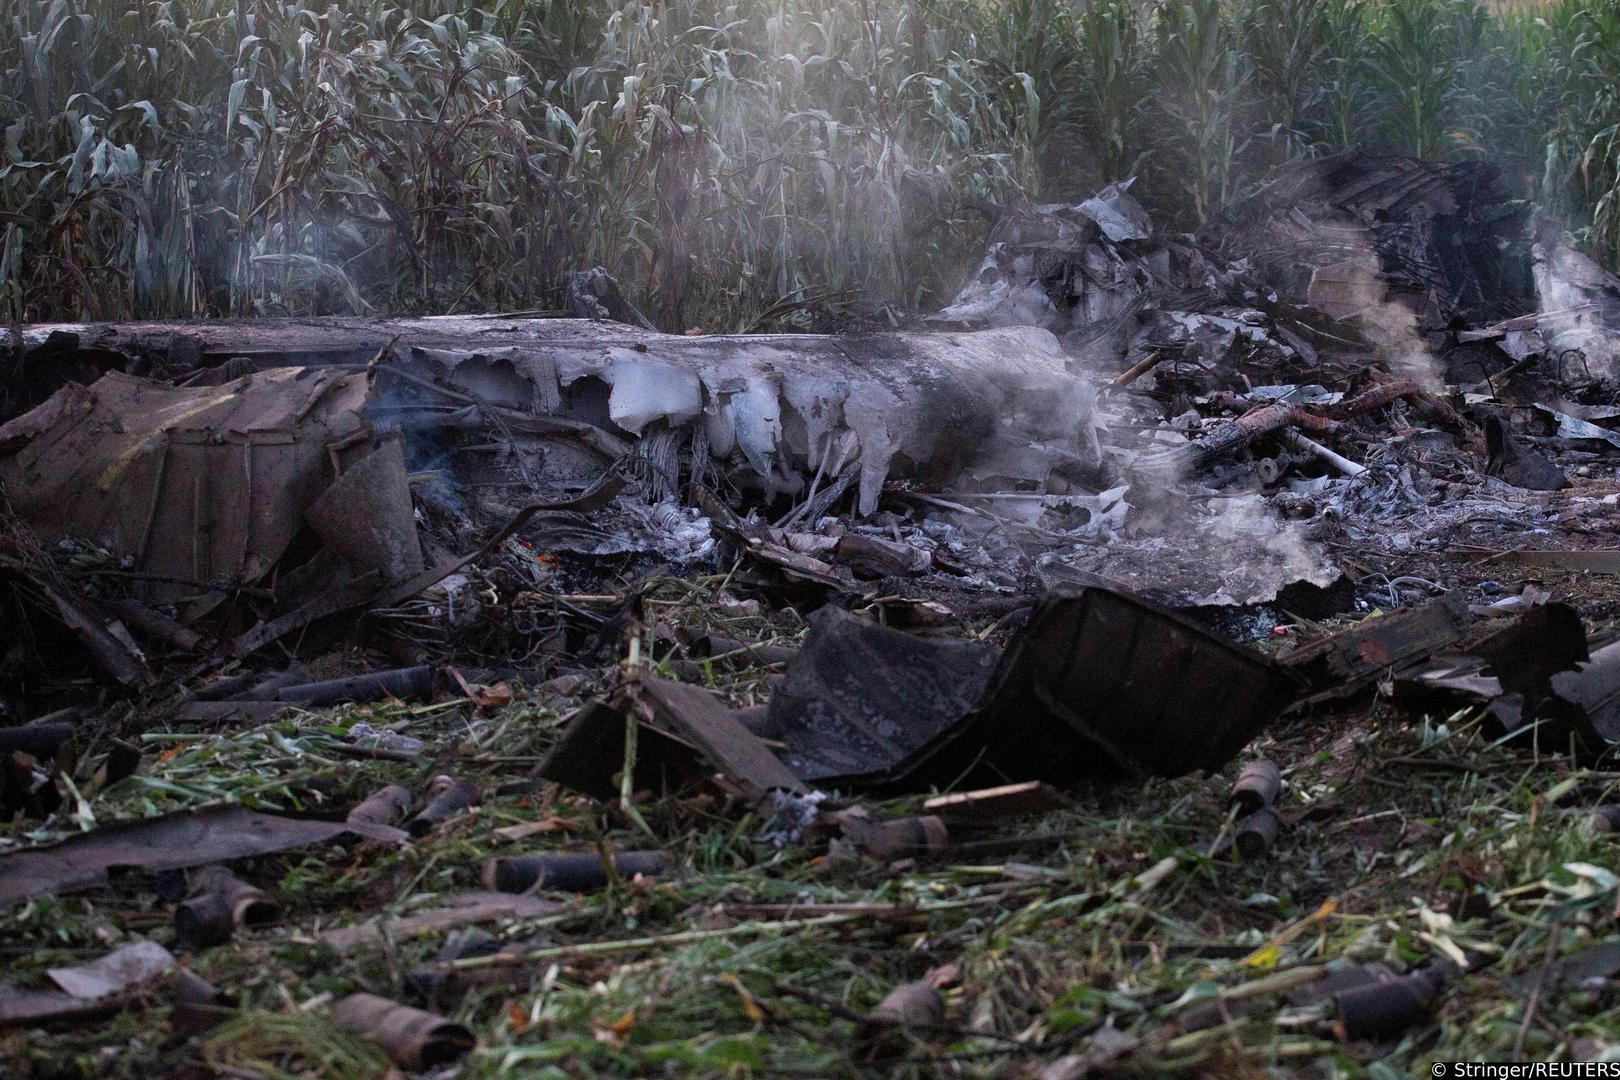 Debris is seen at the crash site of an Antonov An-12 cargo plane owned by a Ukrainian company, near Kavala, Greece, July 17, 2022. REUTERS/Stringer NO RESALES. NO ARCHIVES Photo: Stringer/REUTERS